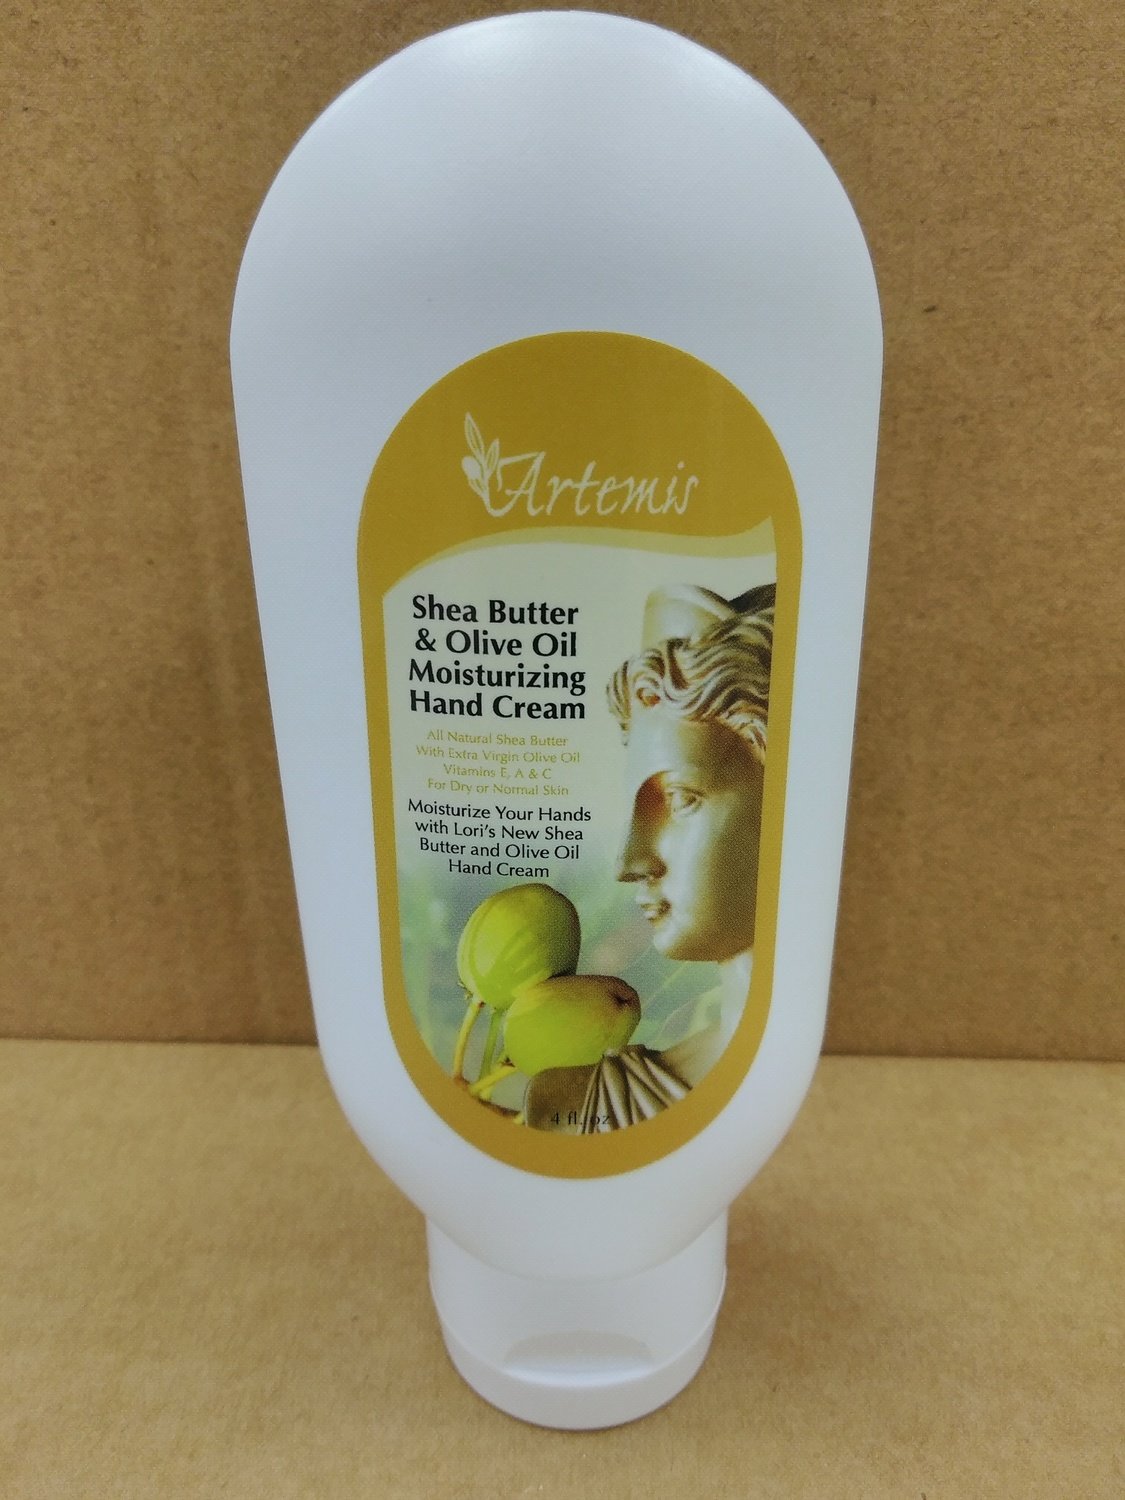 Shea Butter and Olive Oil Hand Cream